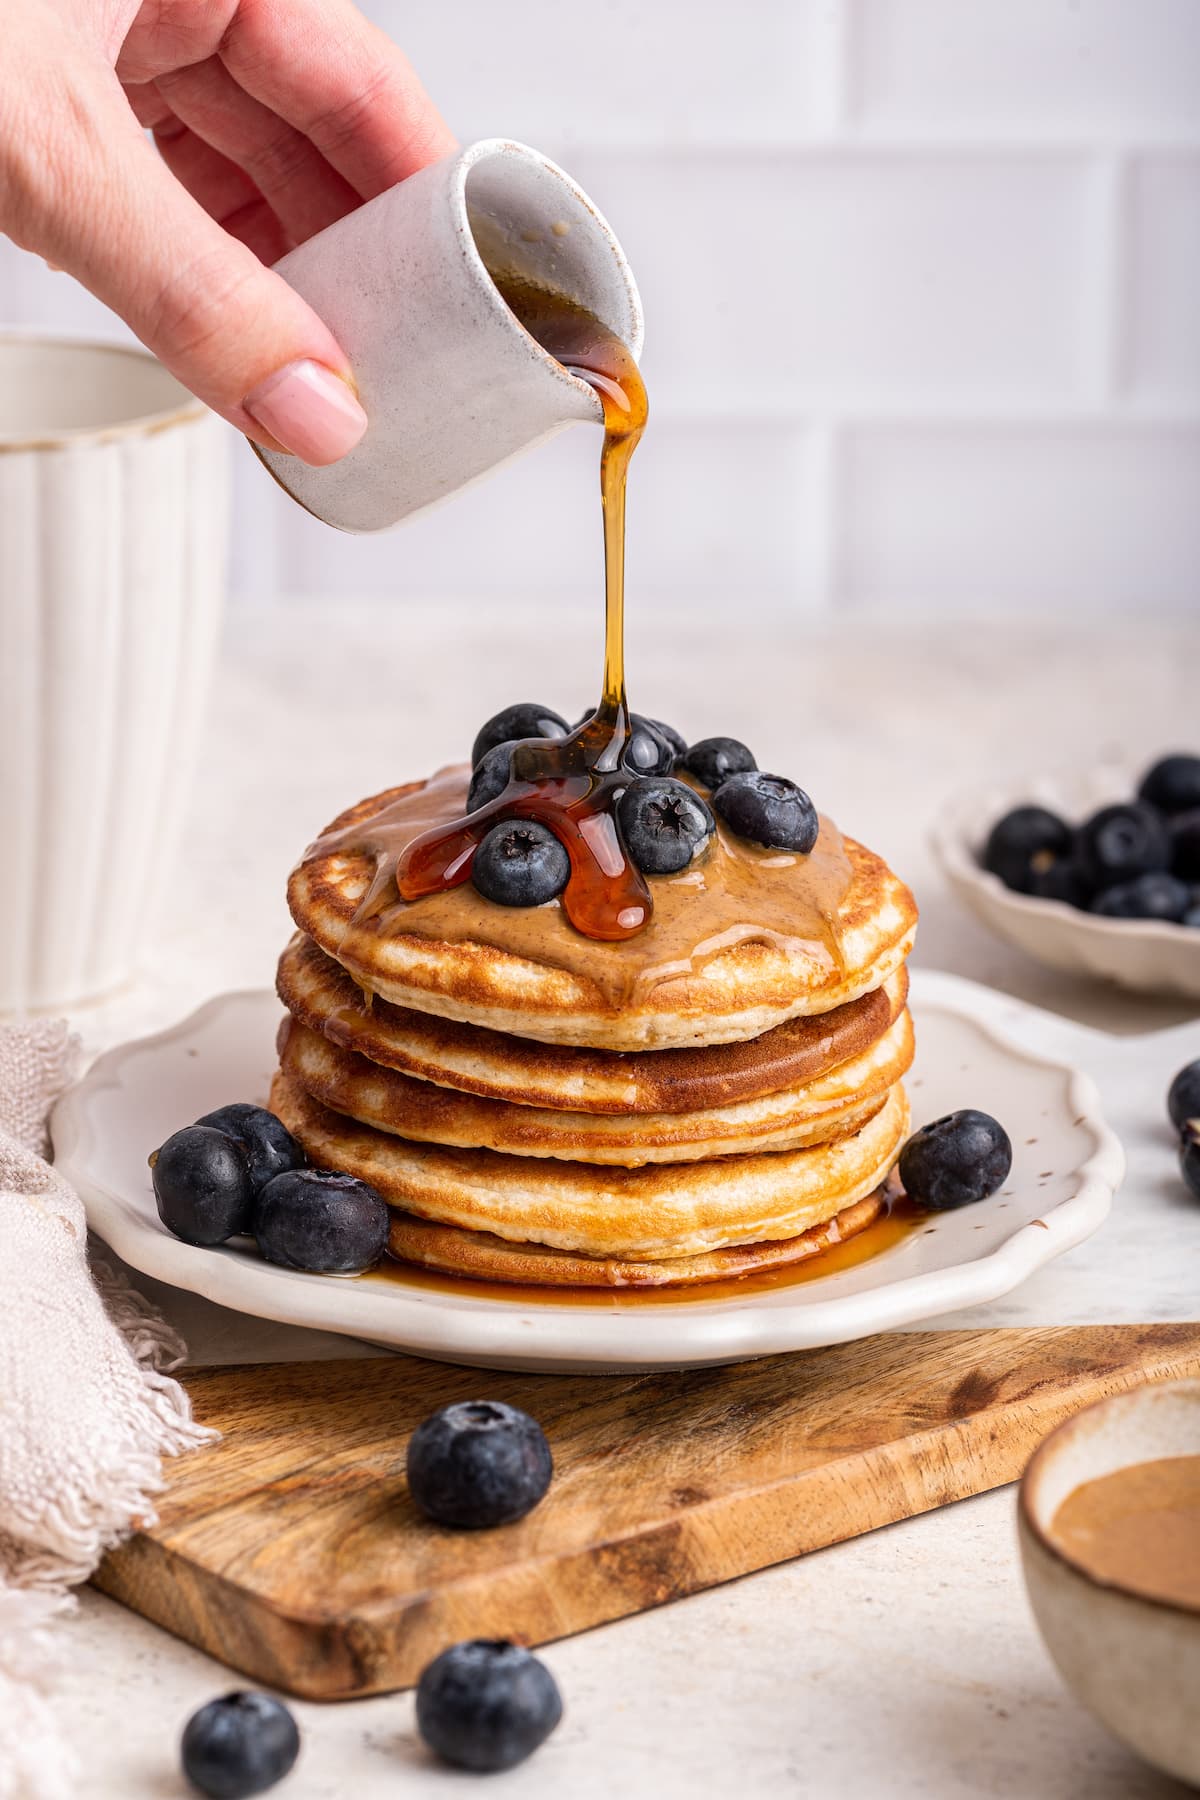 Maple syrup being poured over a stack of protein pancakes that are topped with fresh blueberries and nut butter.